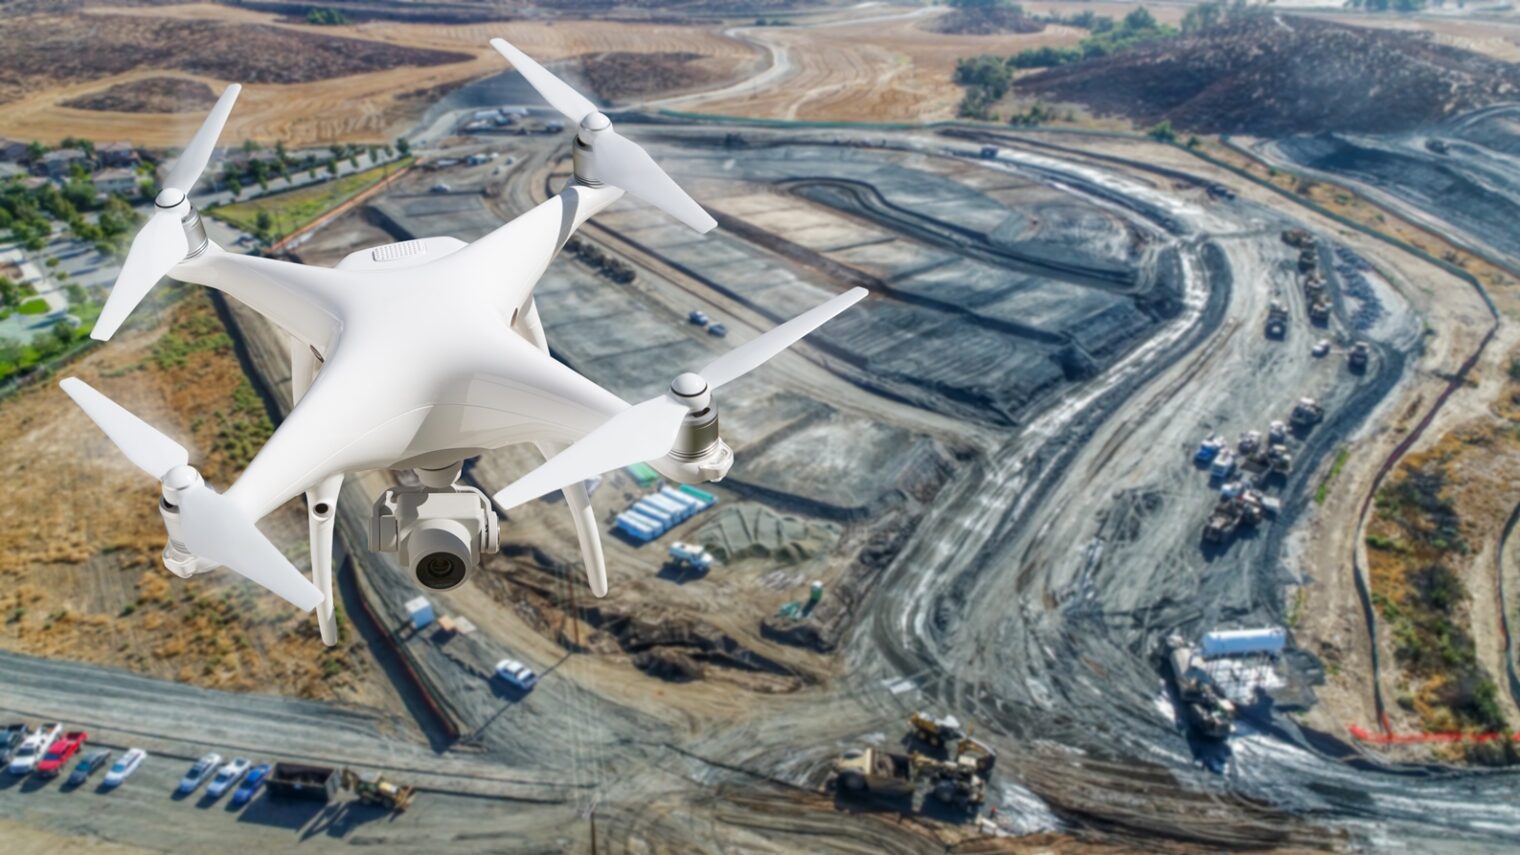 A UAV monitoring a construction site. Photo by Andy Dean Photography/Shutterstock.com